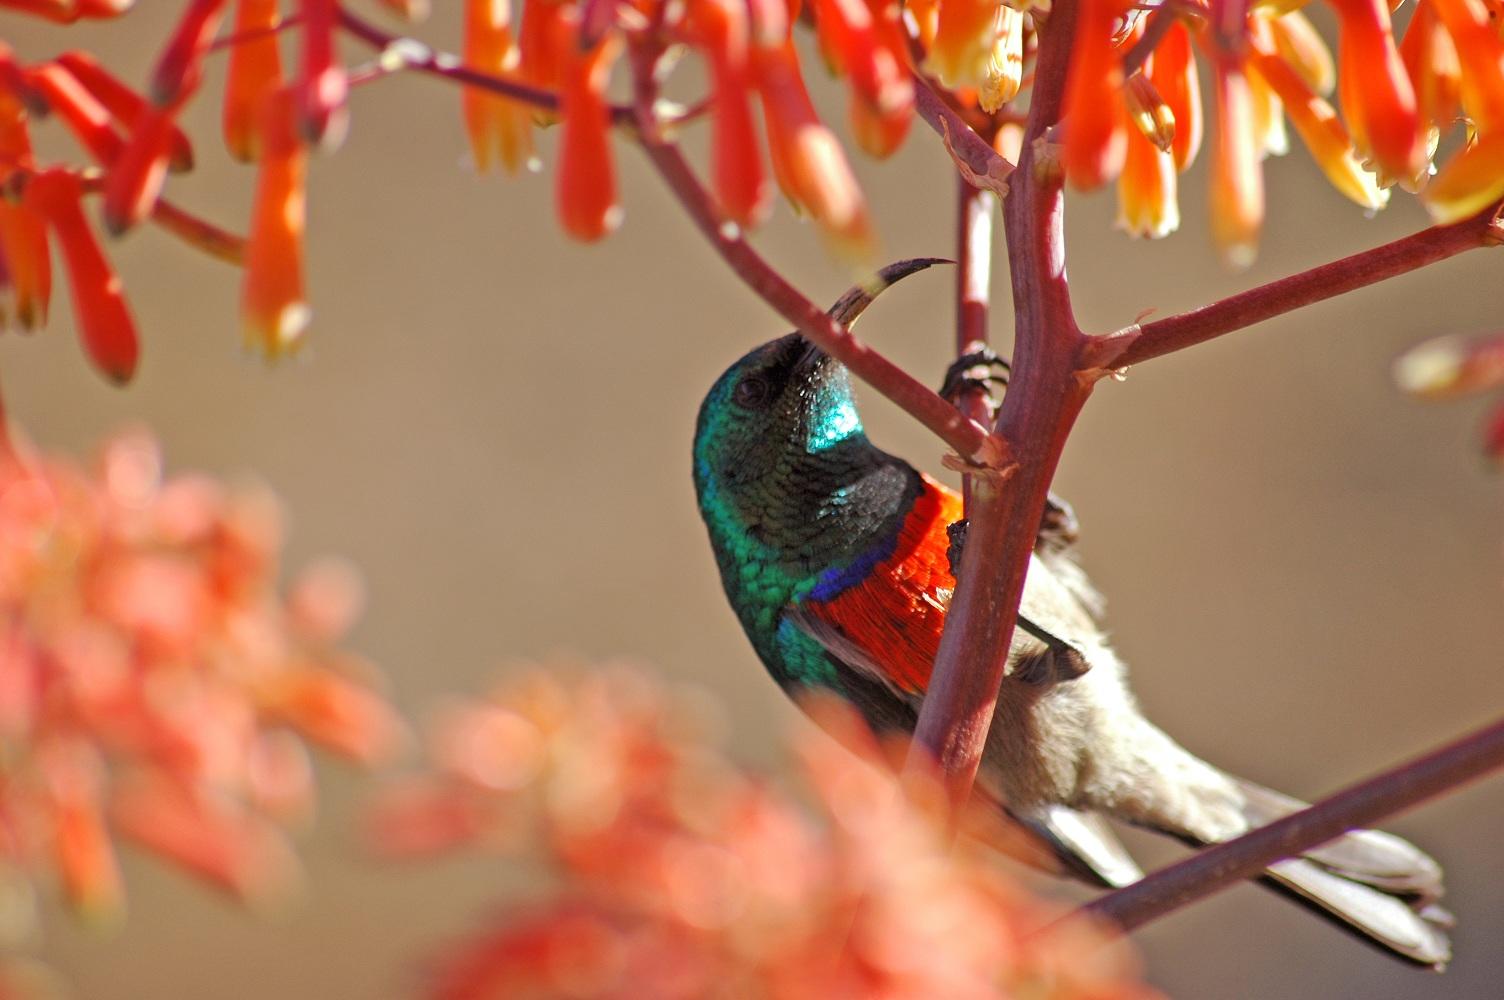 a colorful bird perched on a branch betweem colorful flowers